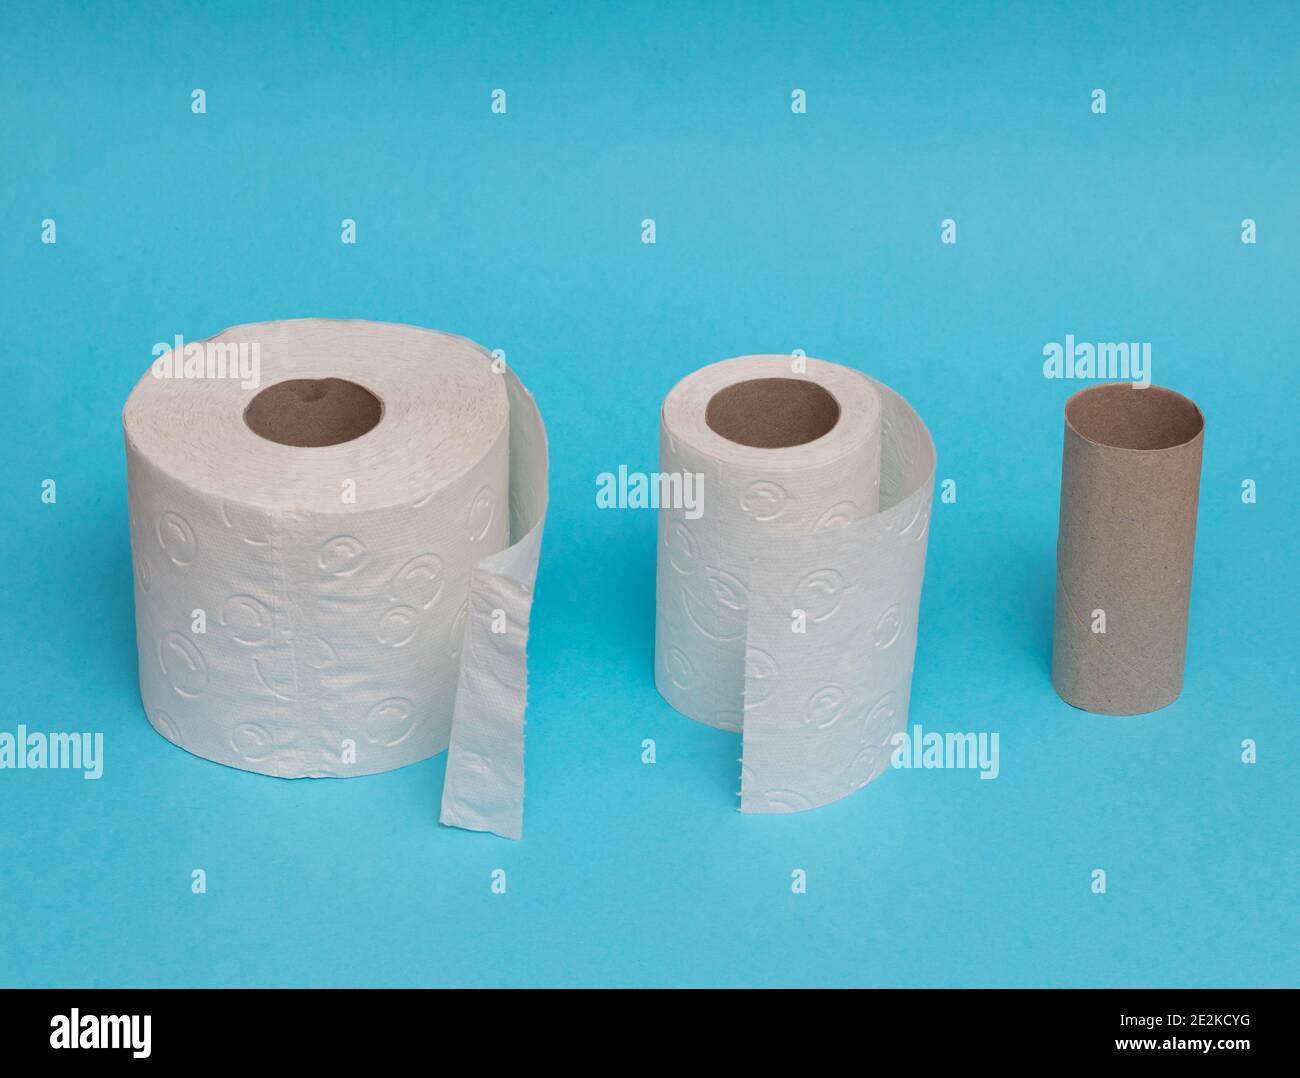 Rolls of toilet paper unrolling against blue background showing usage ...